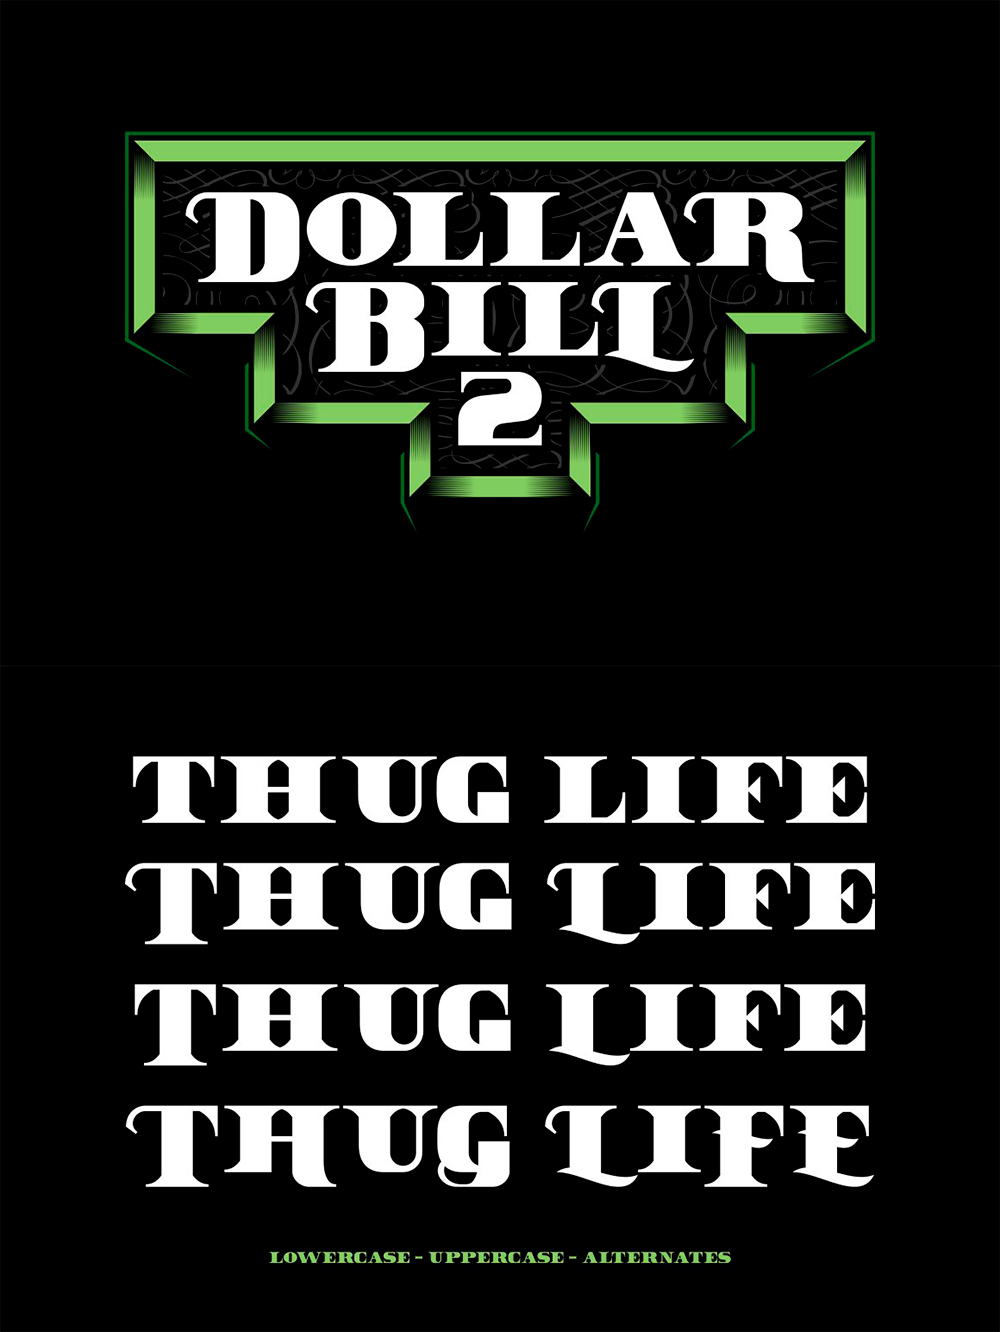 An image with text showing the exquisite Dollar Bill font.